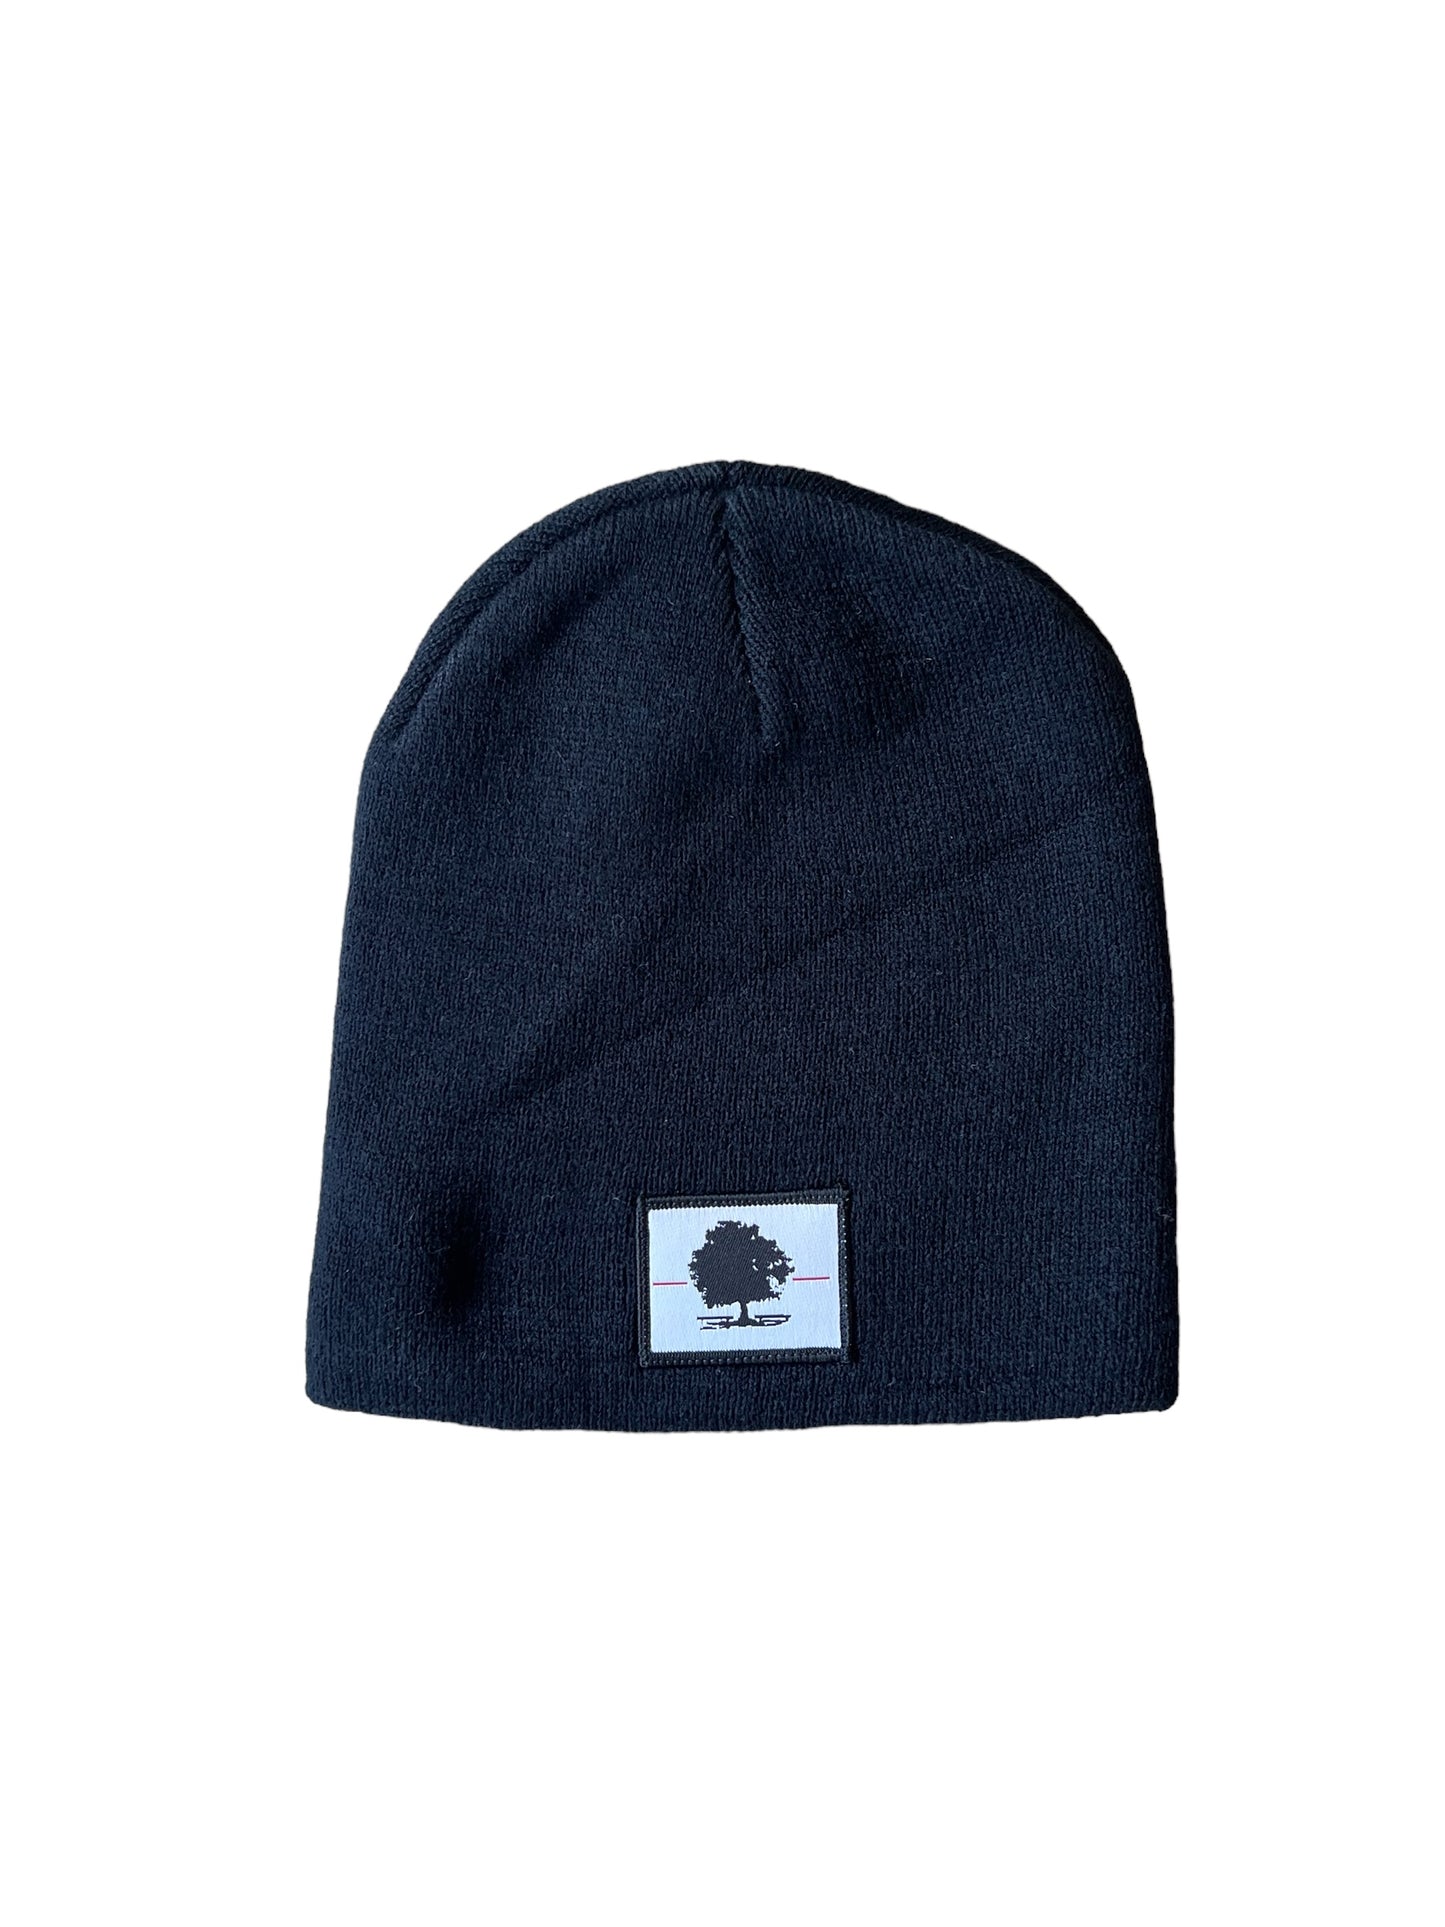 Ohanalei “PineTrees” Patch Beanie - Black